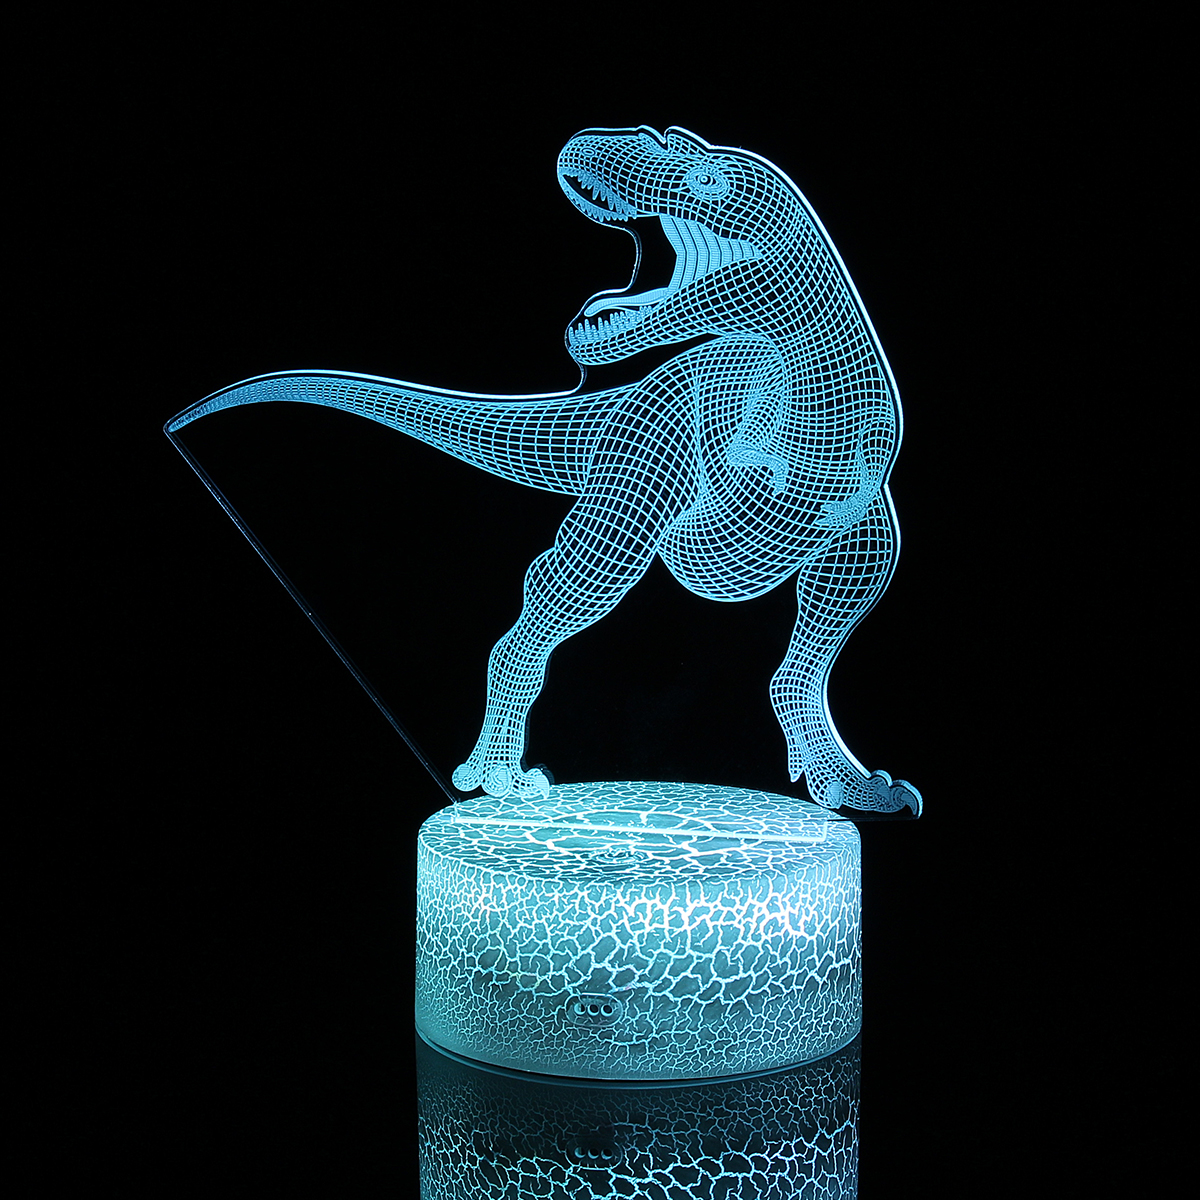 

Remote & Touch Control 3D LED Night Light Dinosaur 7/16 Color Change LED Table Desk Lamp Kids Gift Decorations